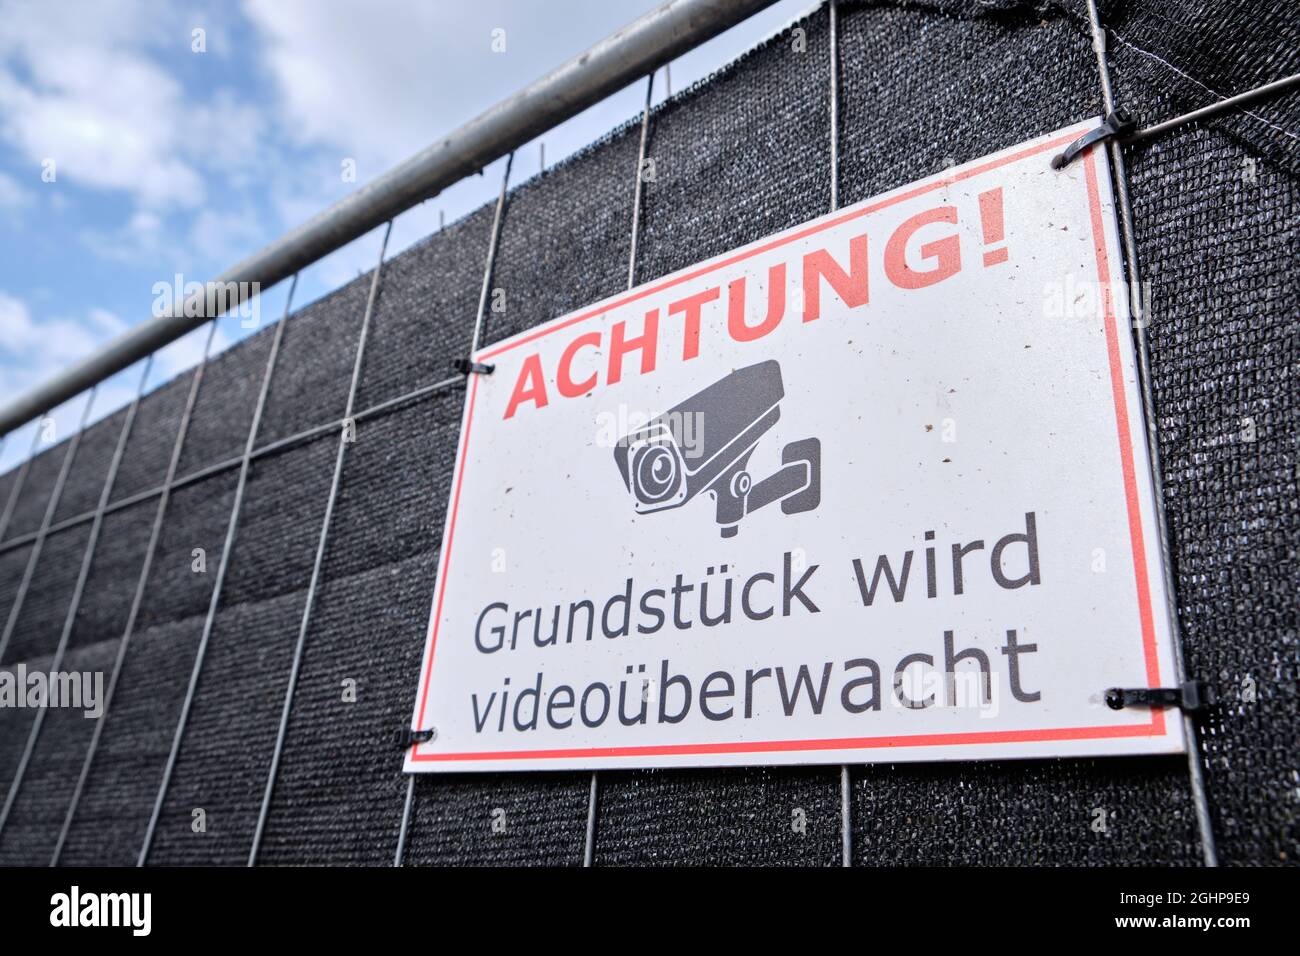 Nuremberg, Germany - August 24, 2021: Close-up of sign at fence of a construction site telling pedestrians Achtung! Grundstück wird videoüberwacht ( W Stock Photo